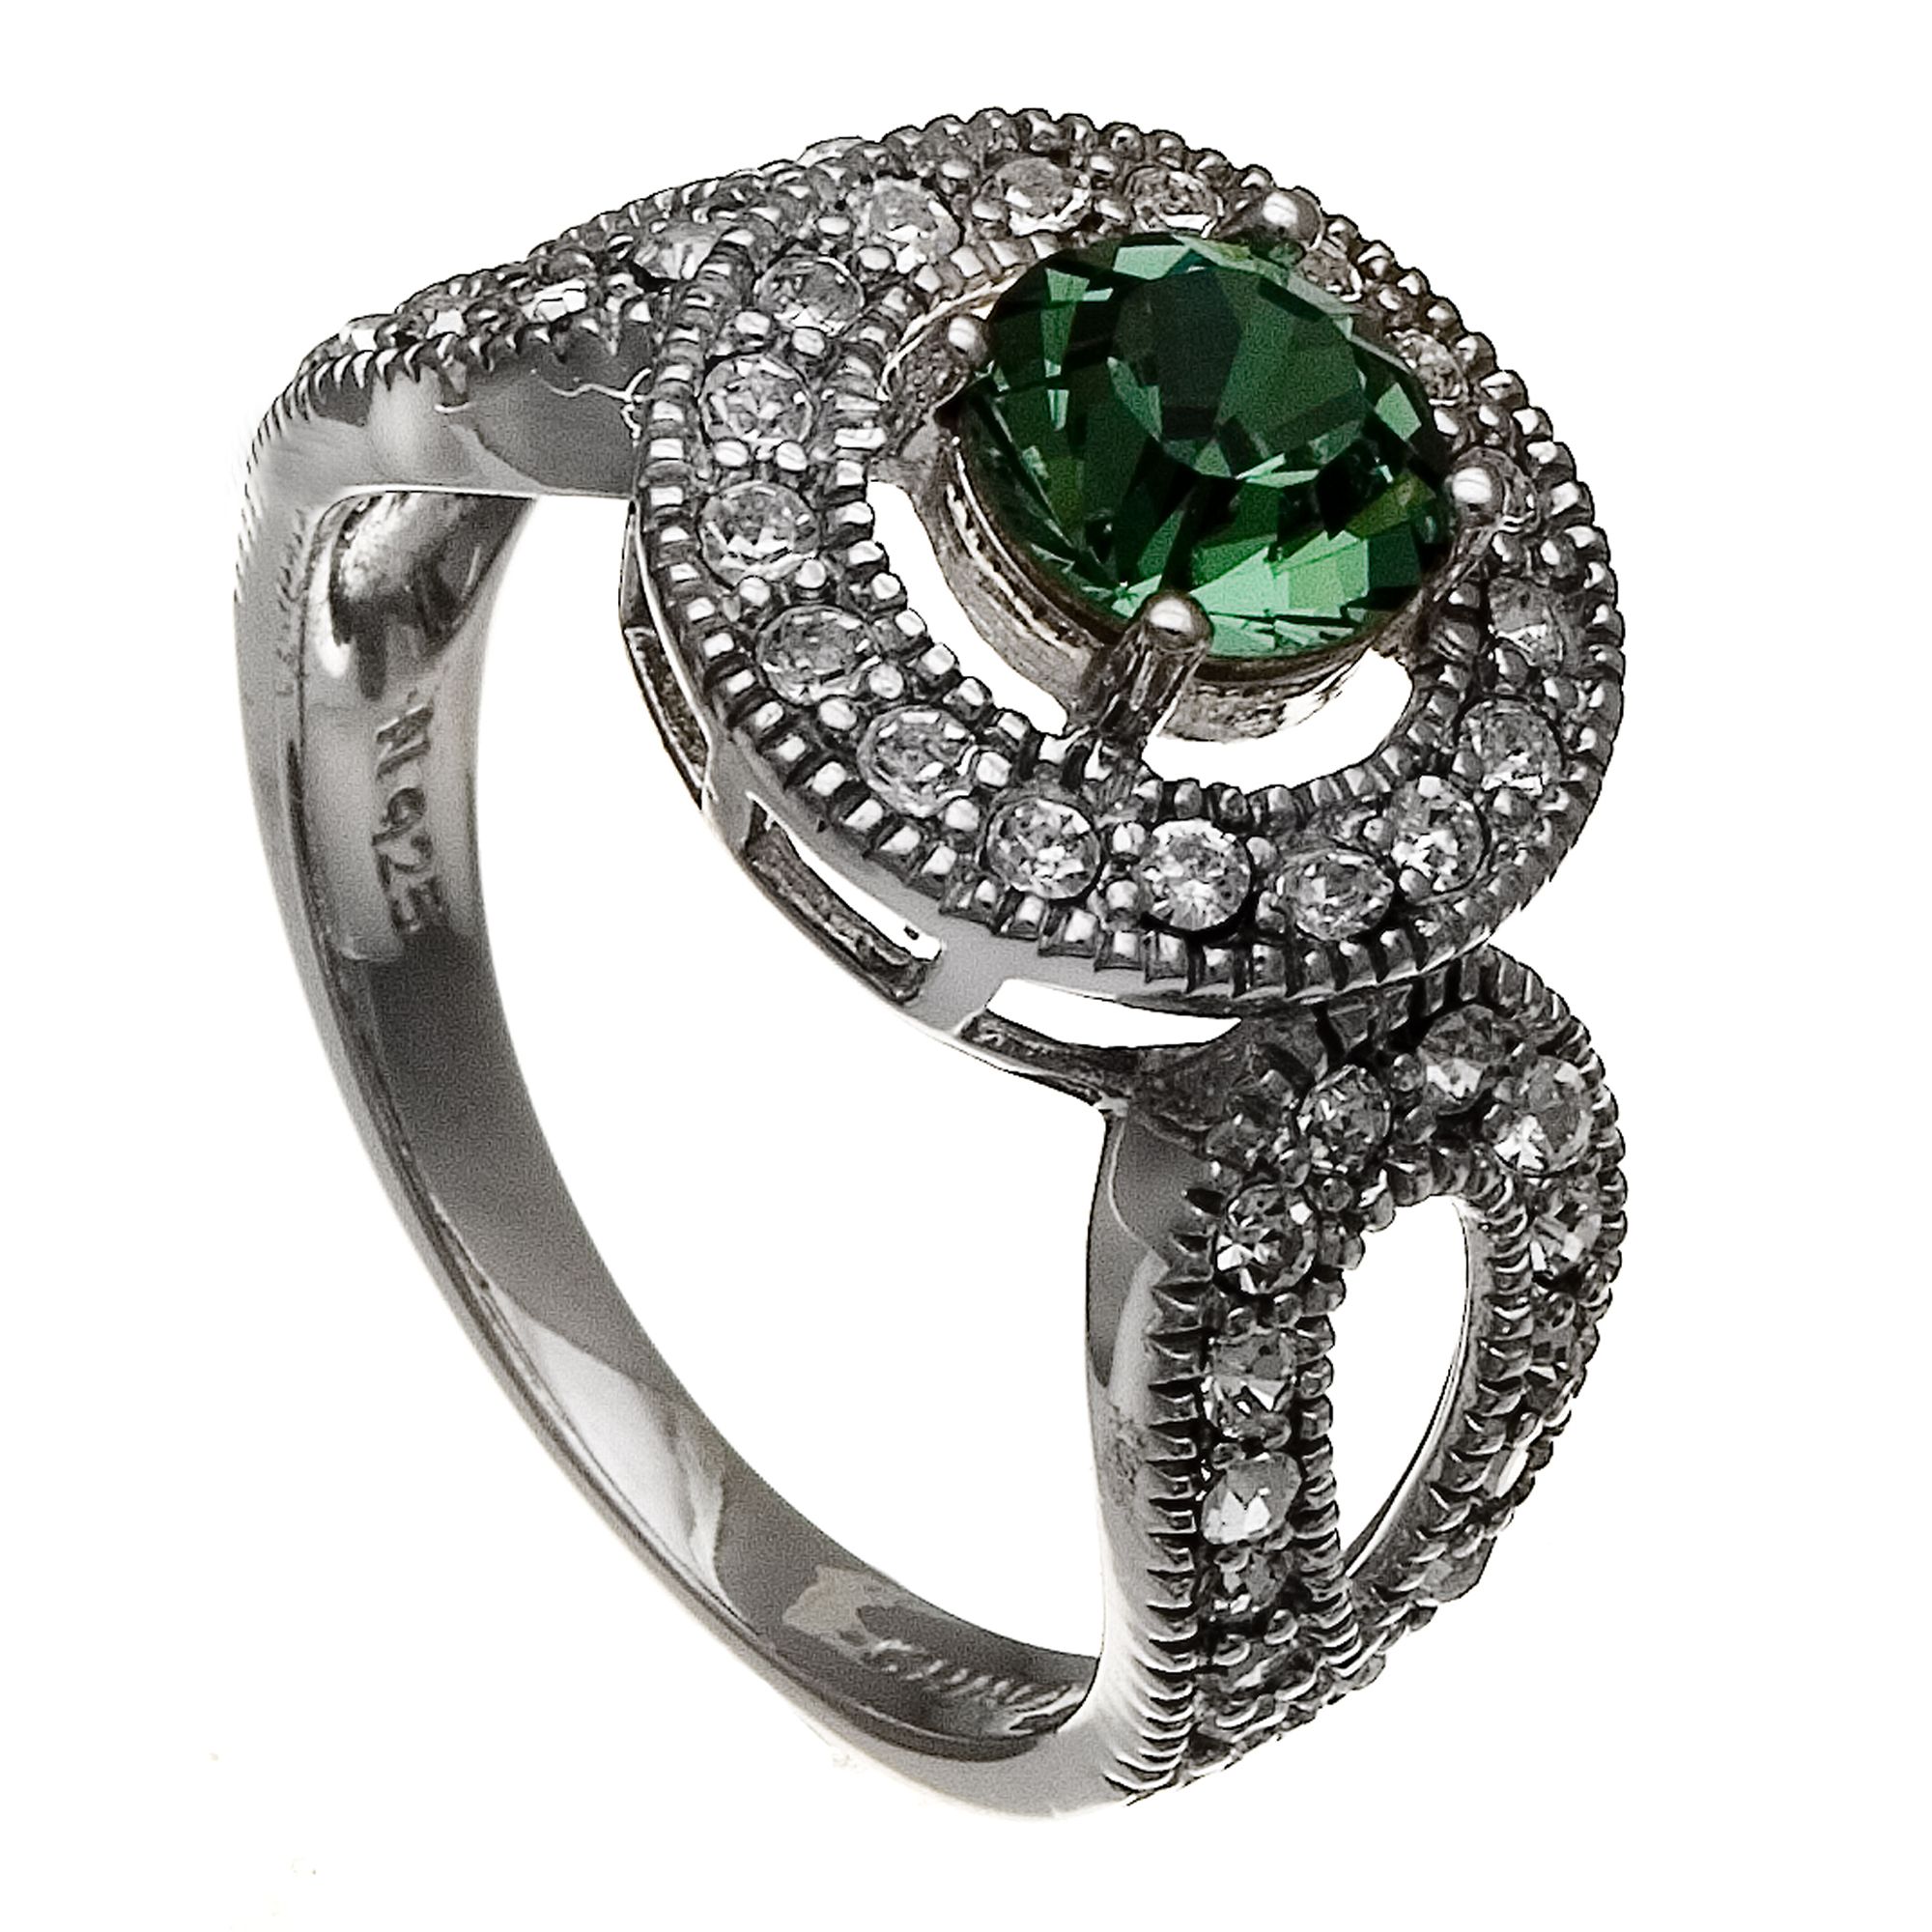 Green Round Crystal Sterling Silver Ring_in Size 8